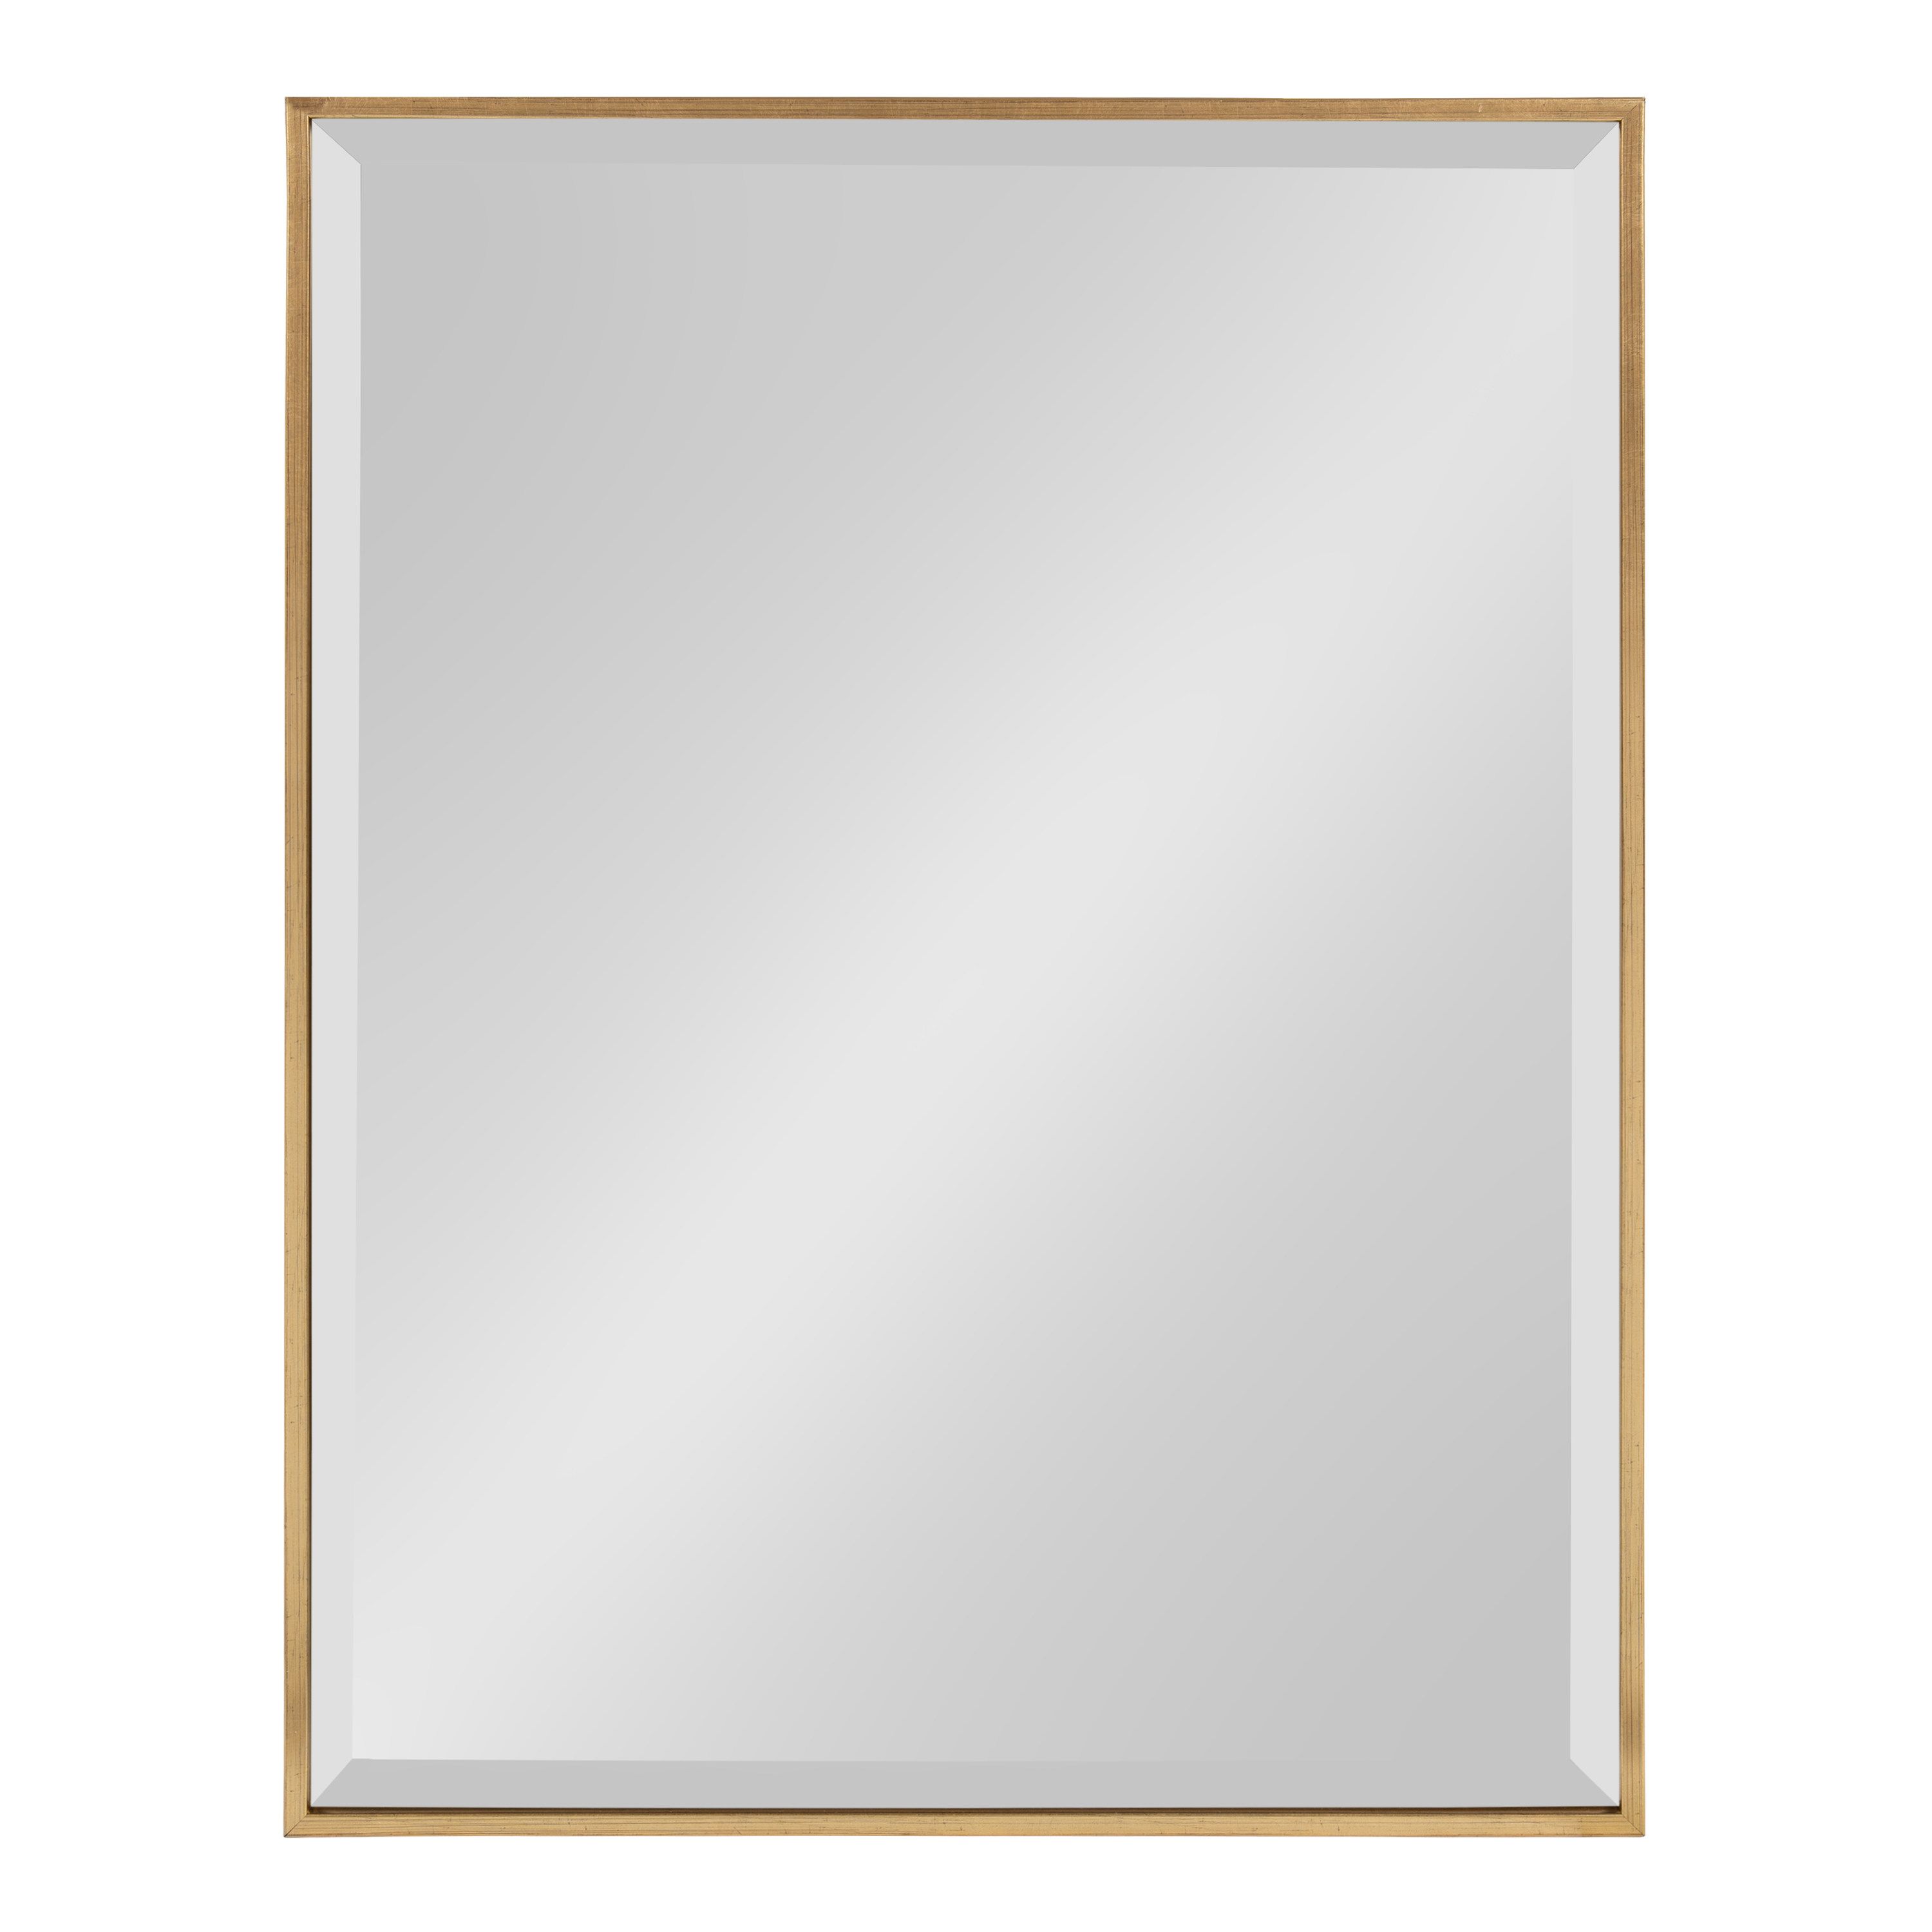 Kate and Laurel Rhodes Framed Decorative Rectangle Wall Mirror, 18.75x24.75 Gold | Walmart (US)